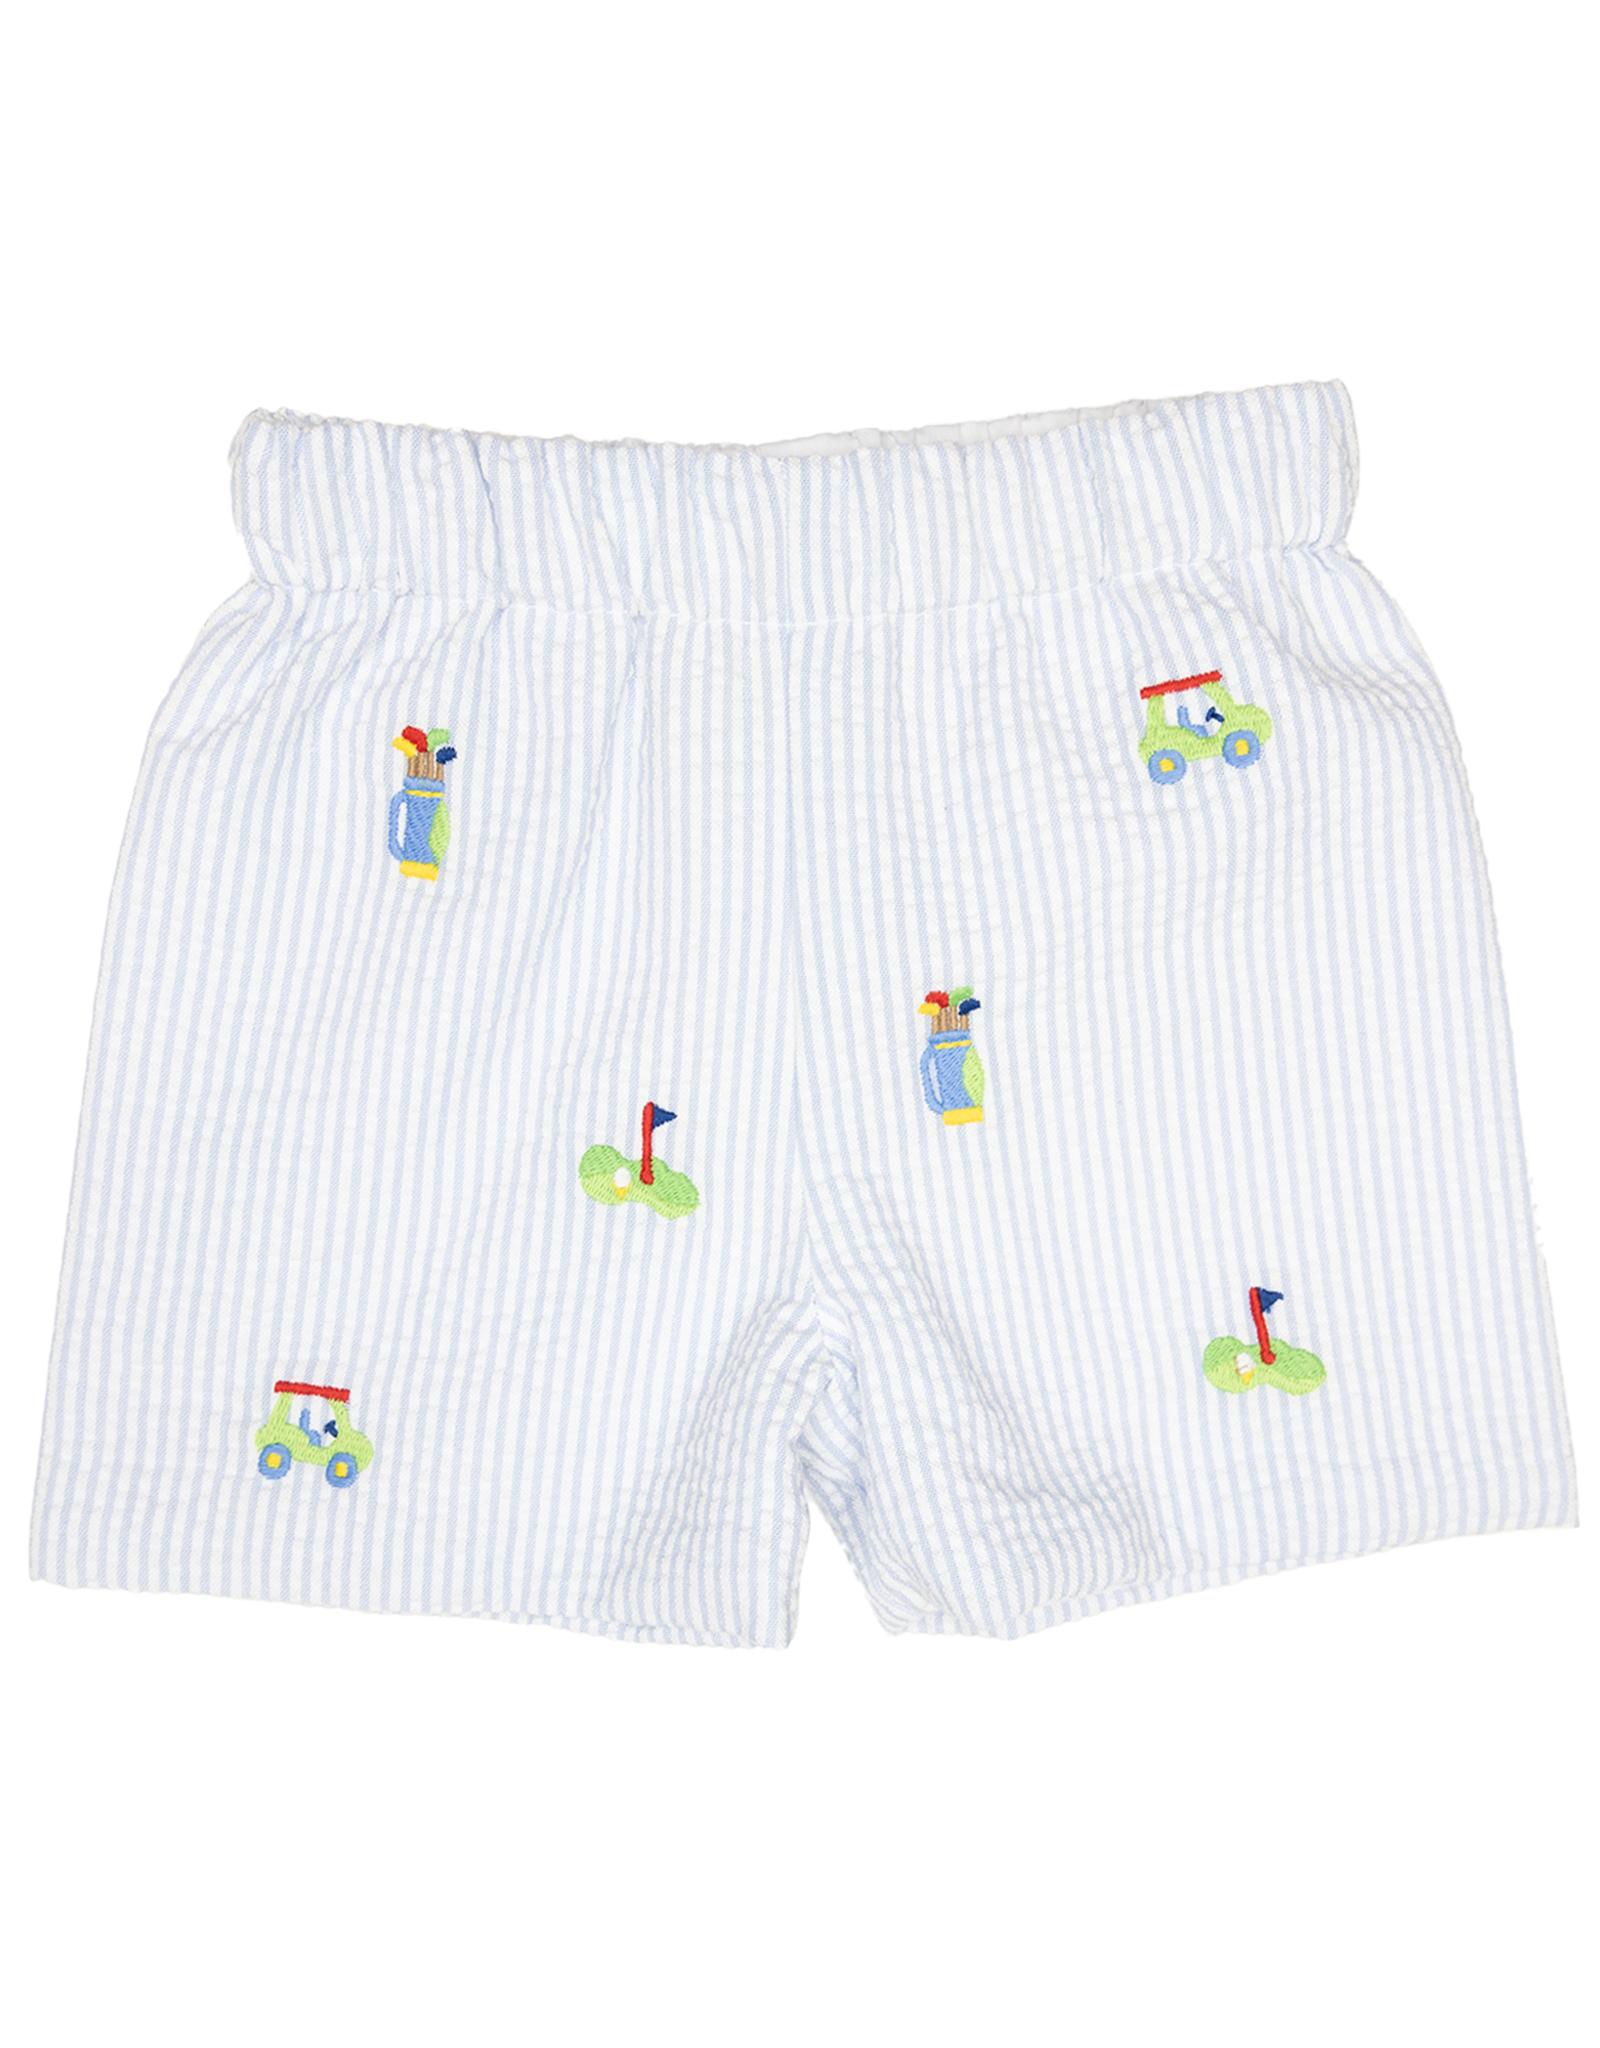 Zuccini ZES24 Embroidered Short Golf